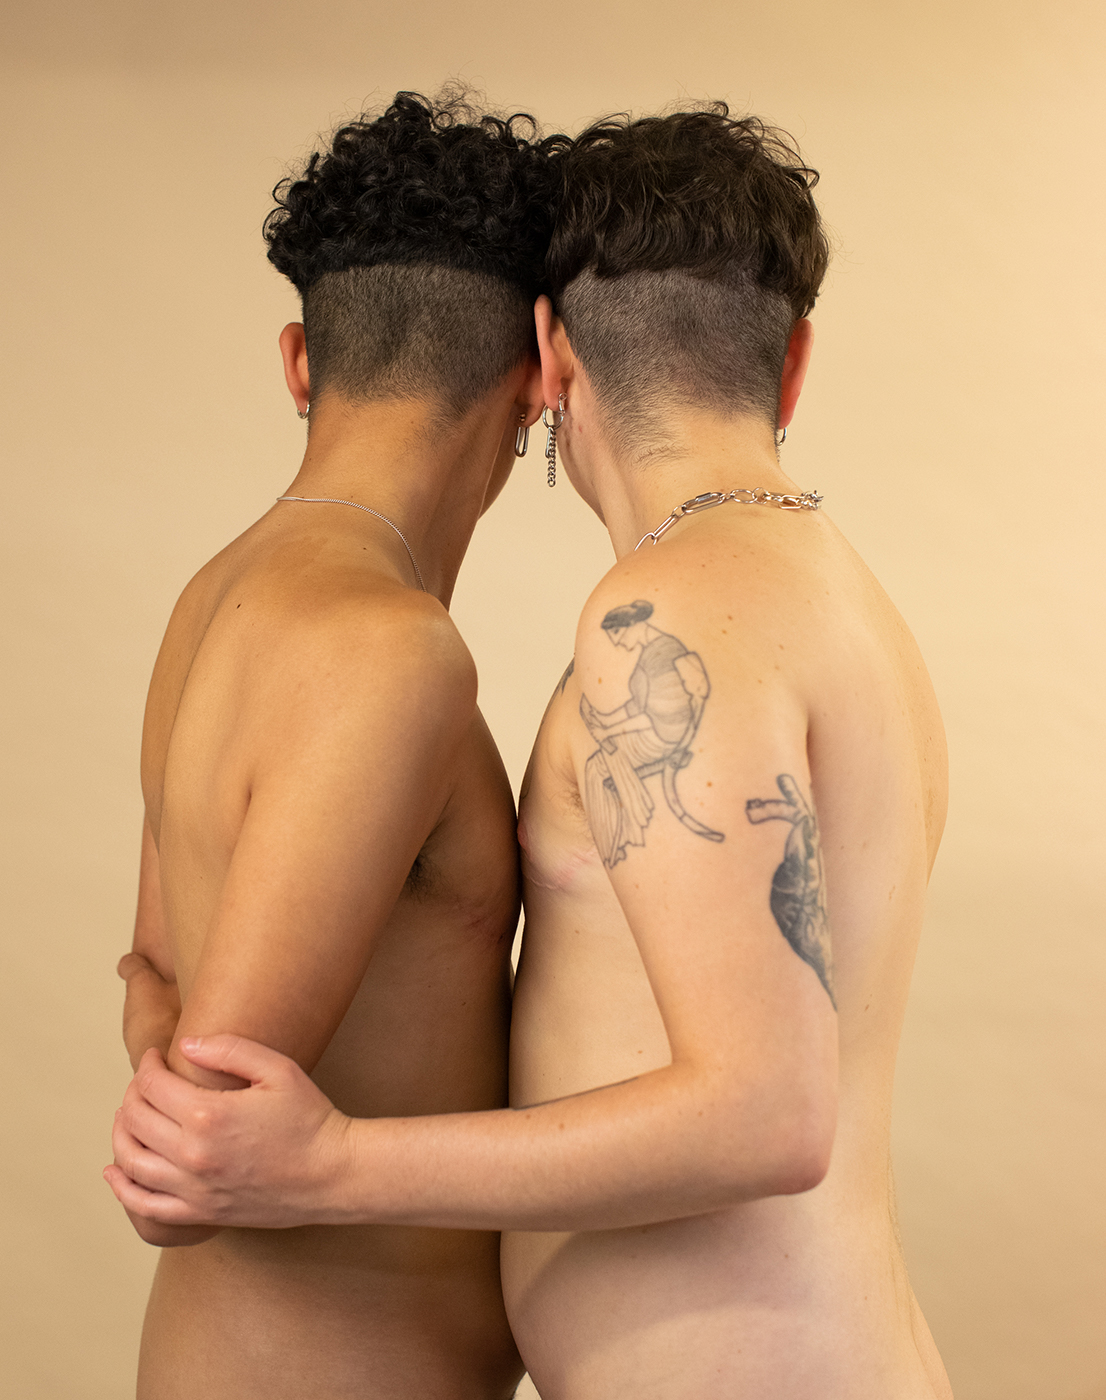 Two figures embrace, shirtless, heads turned away from camera